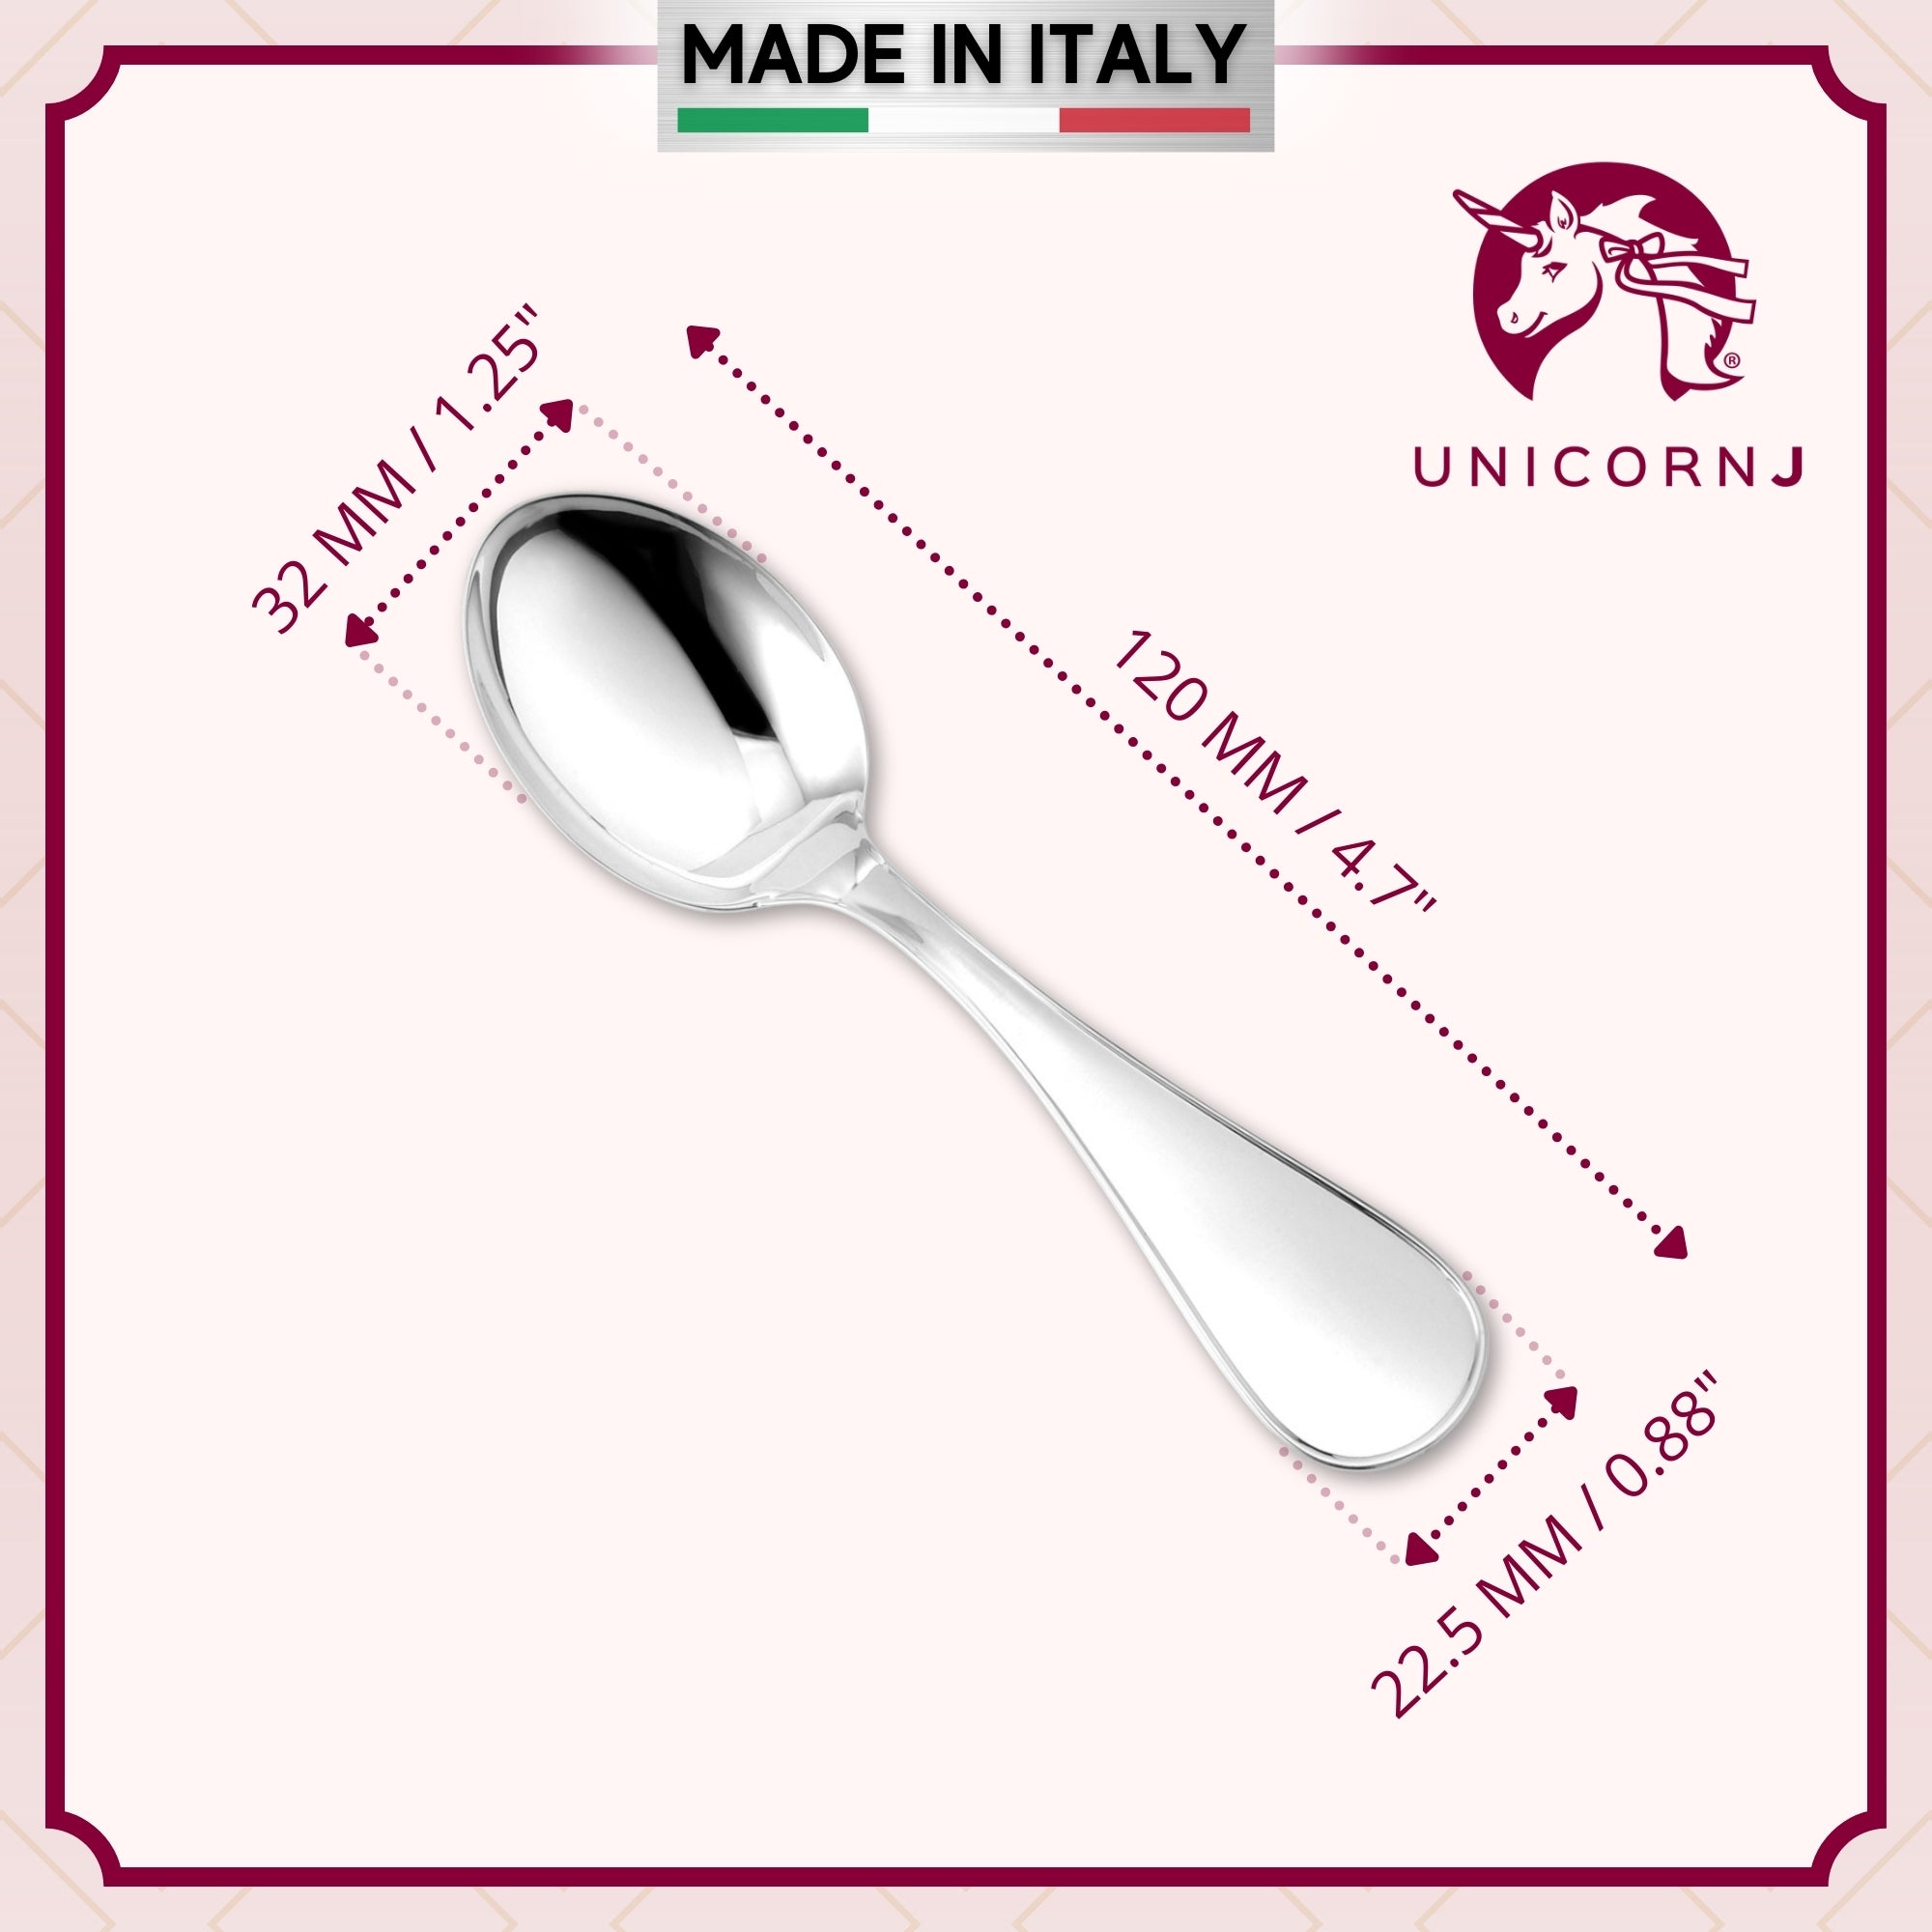 Close-up of the Sterling Silver 925 baby spoon with dimensions indicated